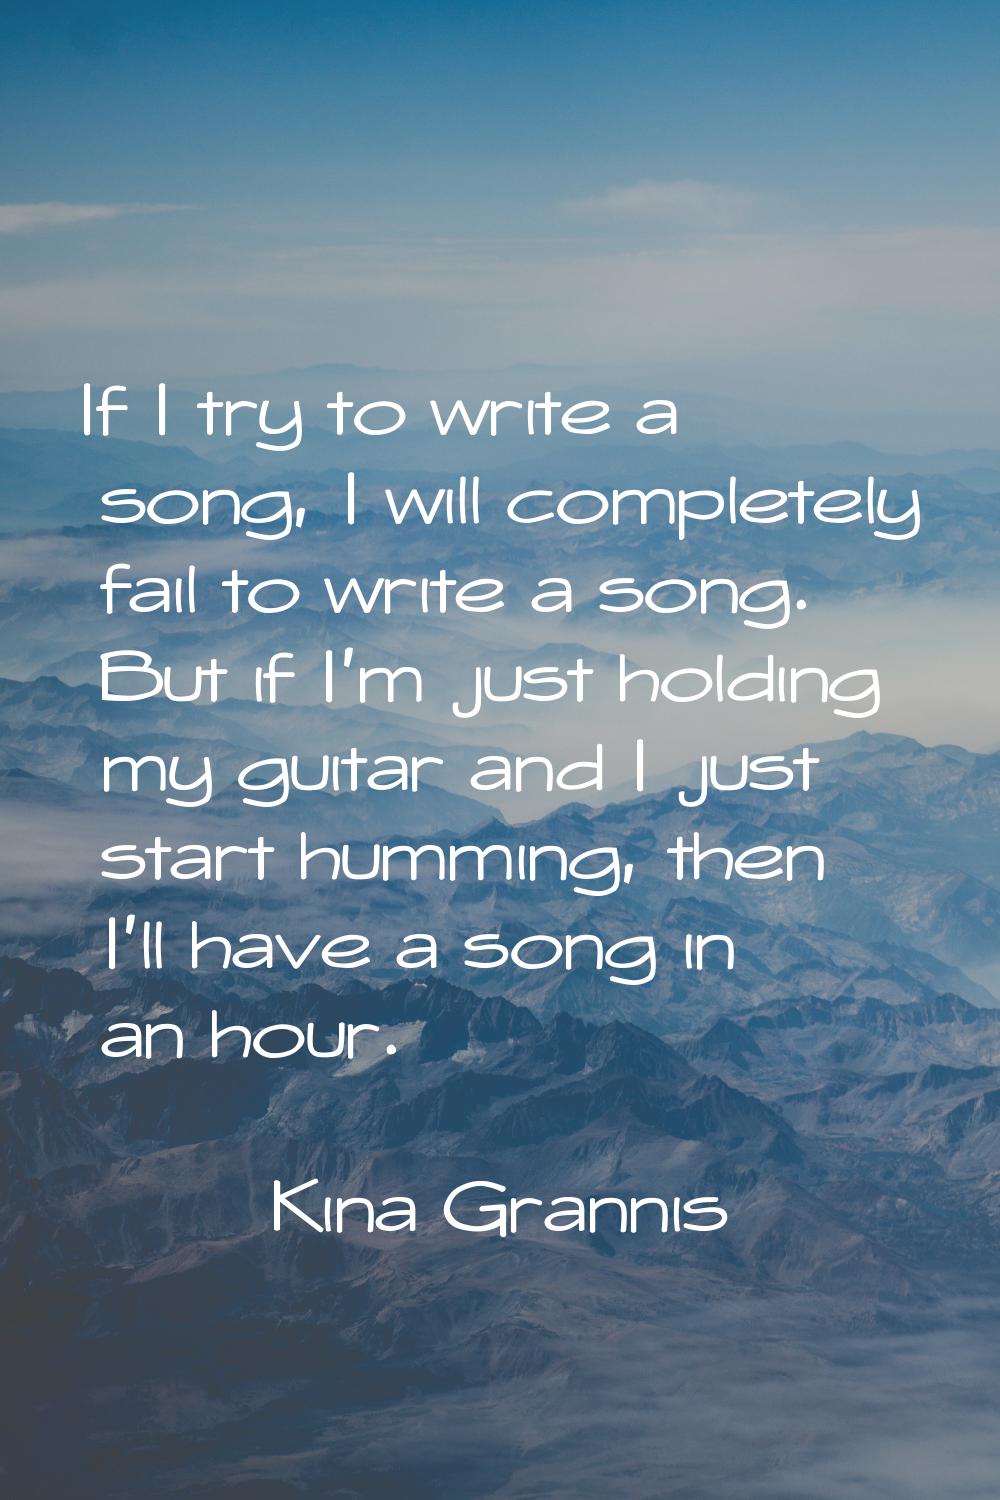 If I try to write a song, I will completely fail to write a song. But if I'm just holding my guitar